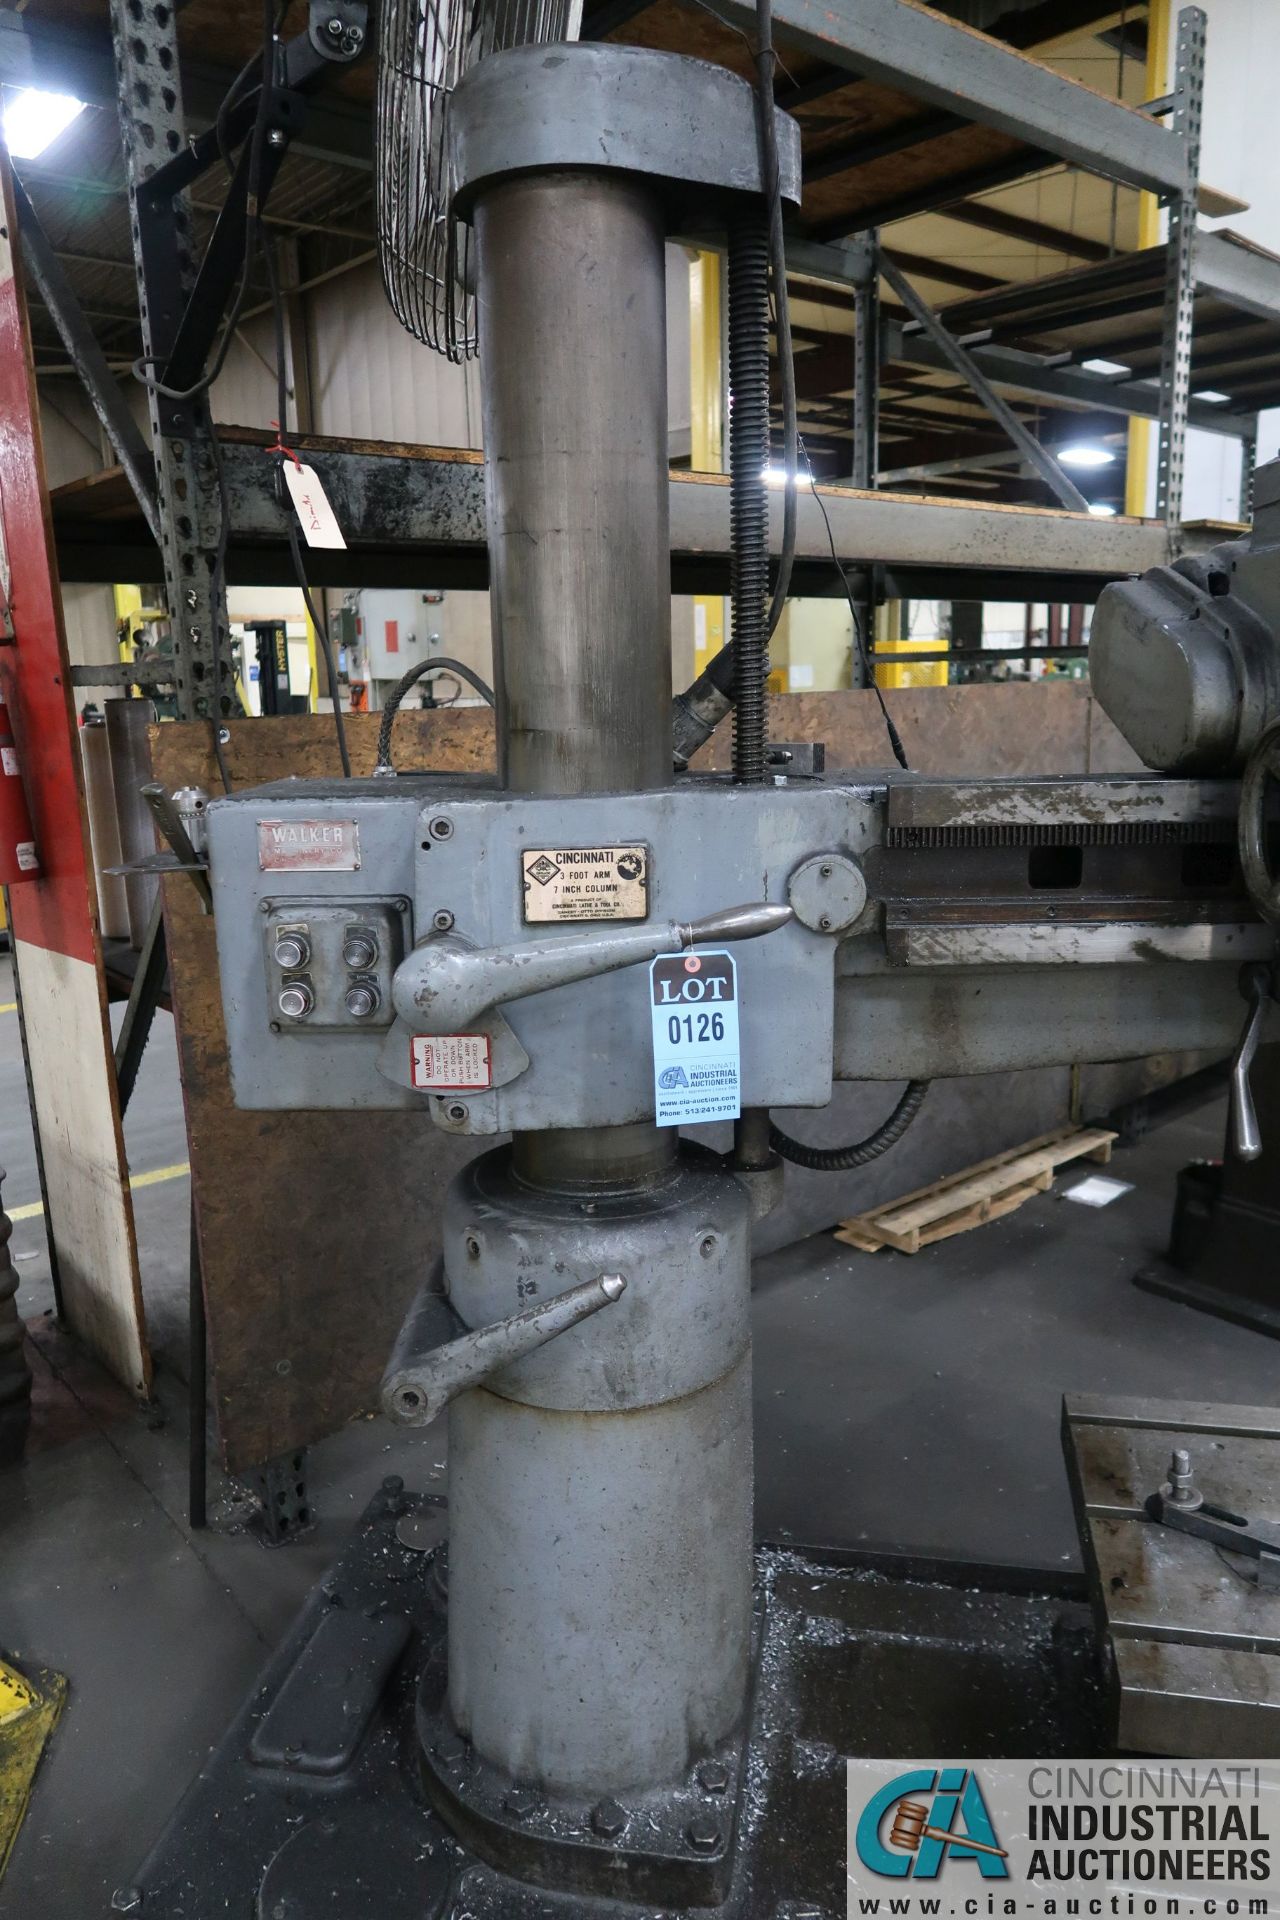 3' ARM X 7" COLUMN CINCINNATI LATHE AND TOOL RADIAL ARM DIRLL; S/N 3LA1A1Z-97, 52-1505 SPINDLE RPMS, - Image 9 of 11